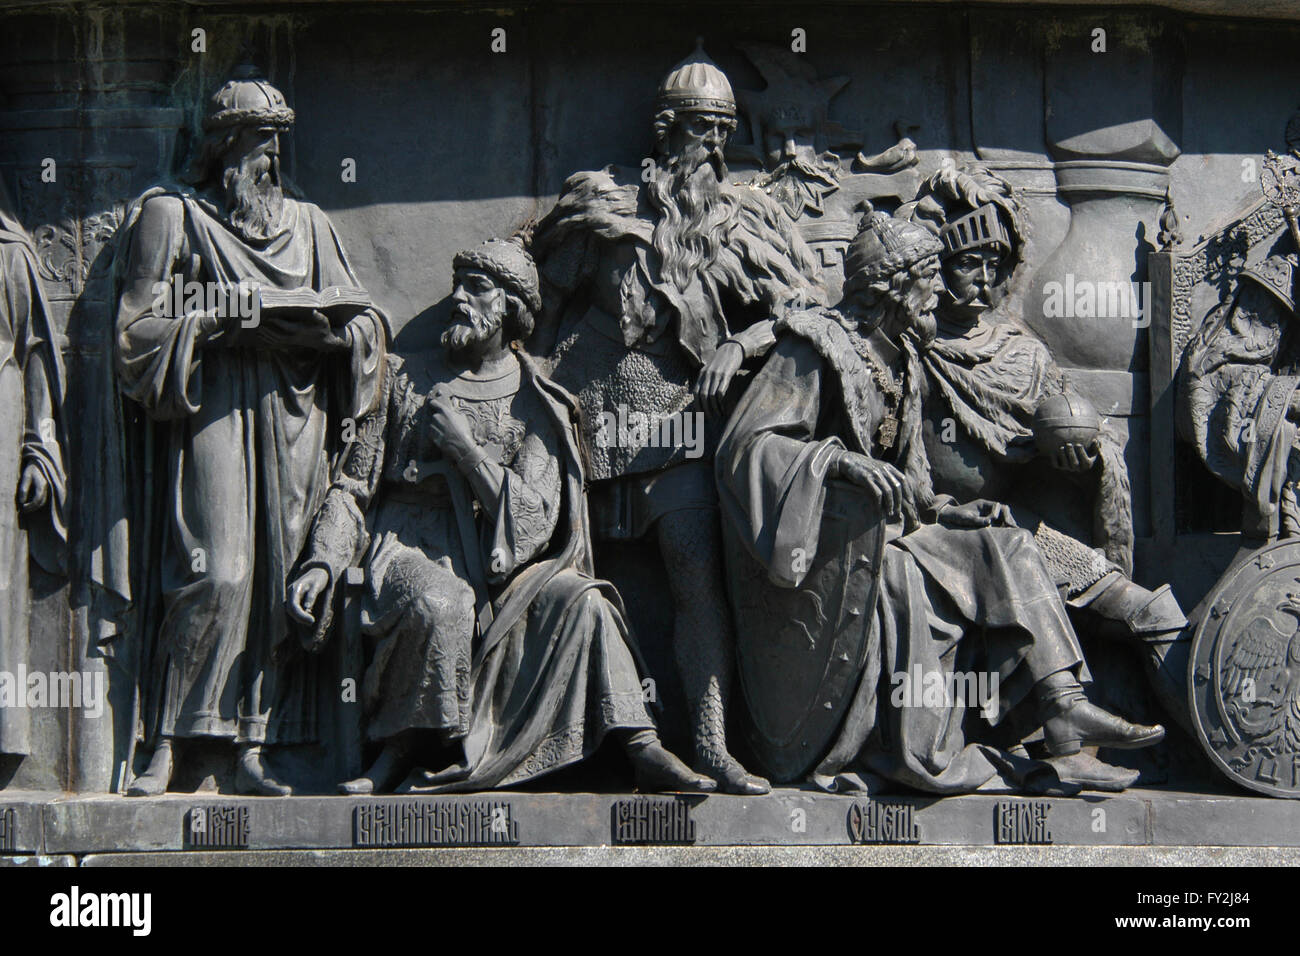 Kievan princes Yaroslav the Wise and Vladimir Monomakh and Lithuanian princes Gediminas, Algirdas and Vytautas the Great depicted (from left to right) in the bas relief dedicated to Russian statesmen by Russian sculptor Nikolai Laveretsky. Detail of the Monument to the Millennium of Russia (1862) designed by Mikhail Mikeshin in Veliky Novgorod, Russia. Stock Photo